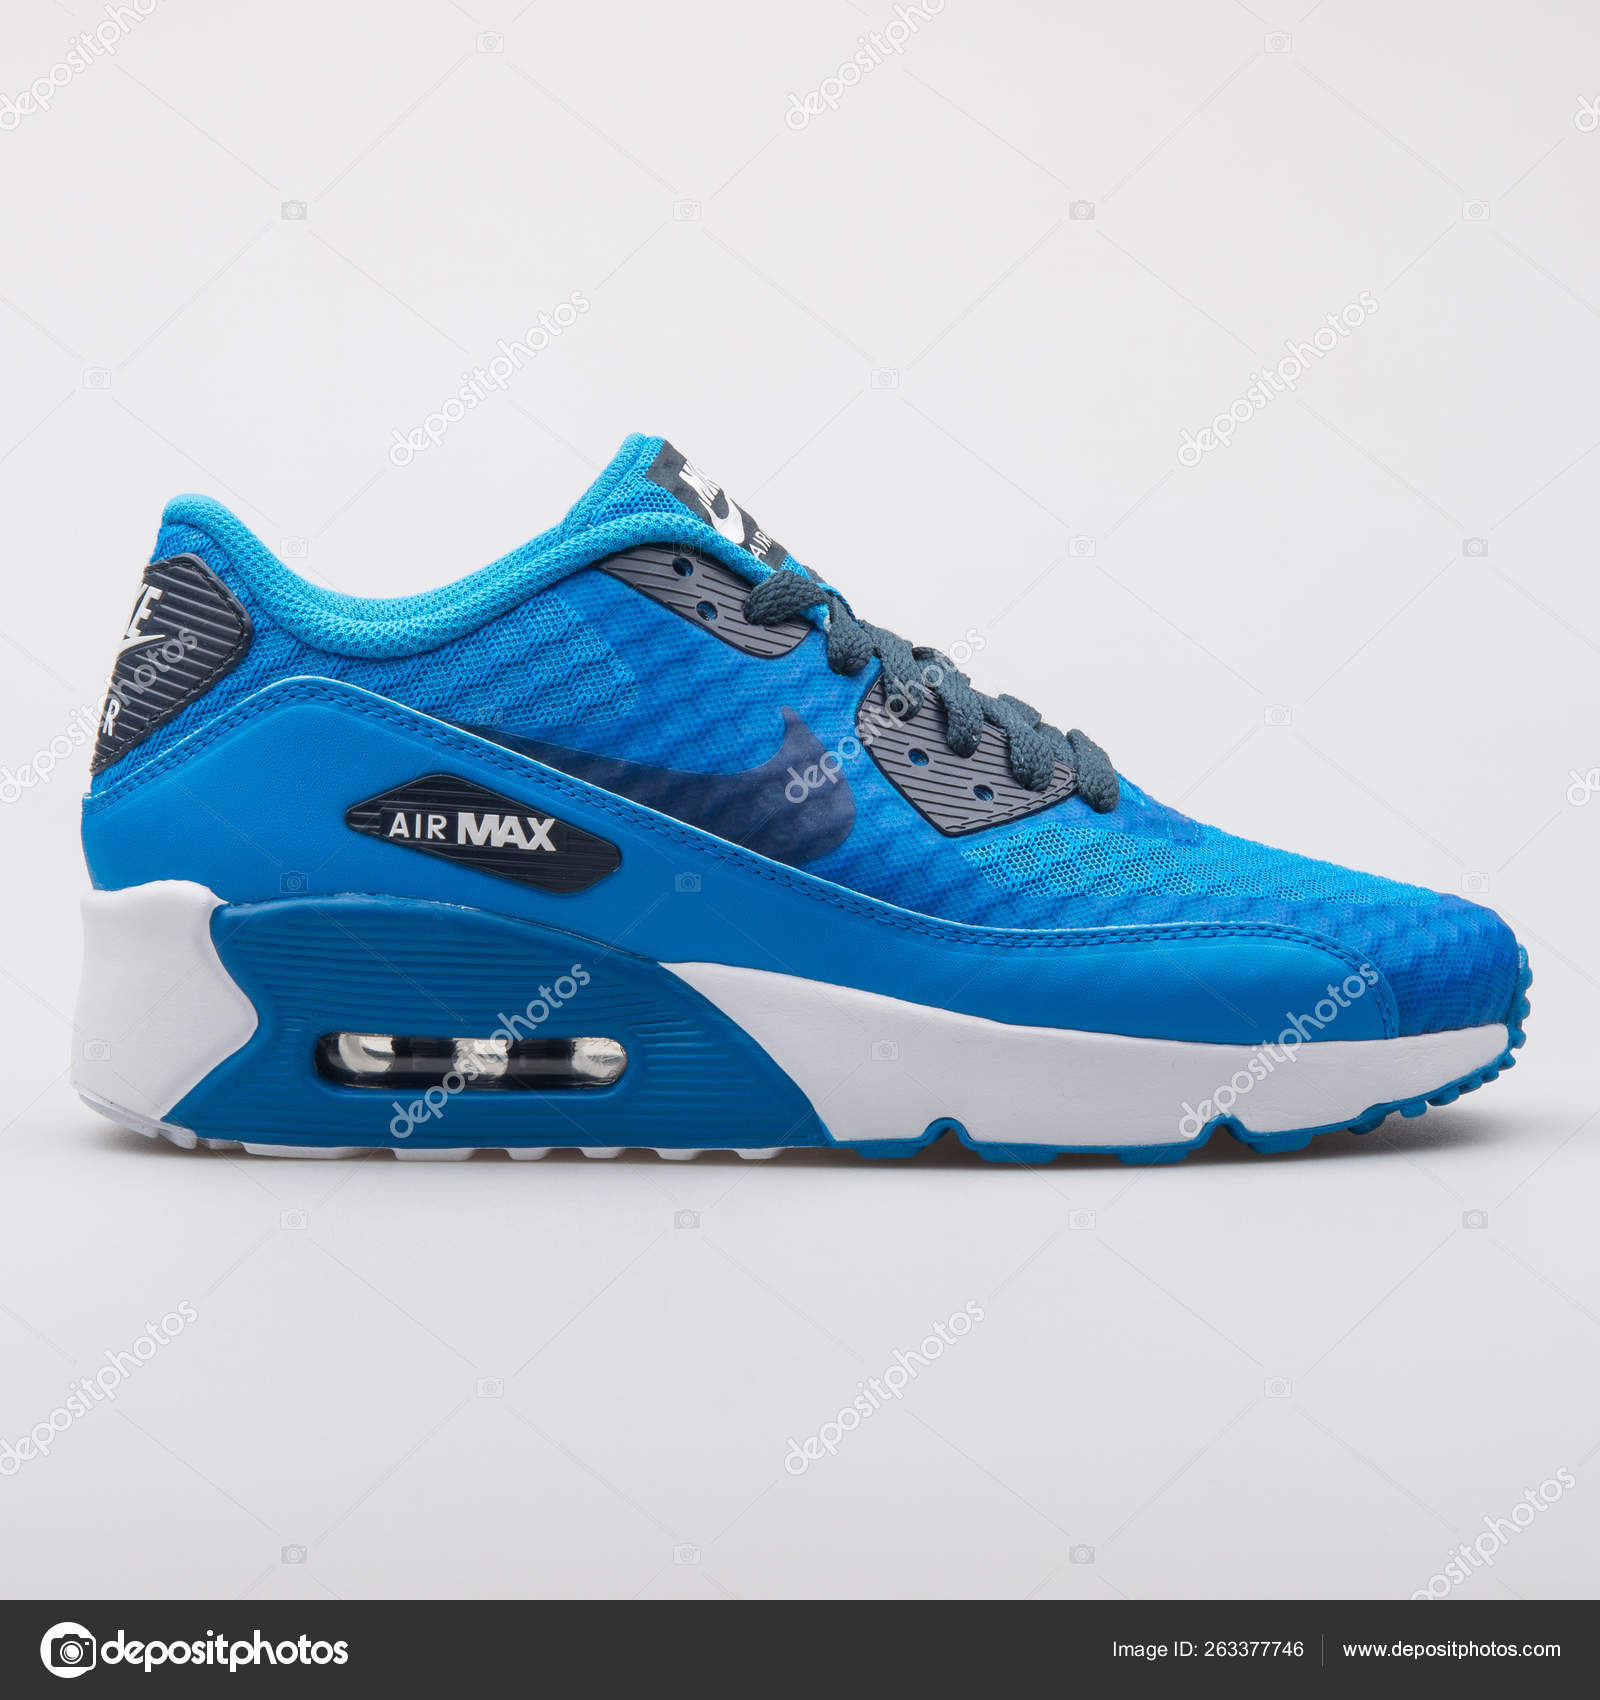 Nike Air Max 90 Ultra 2.0 BR blue and white sneaker – Stock Editorial Photo xMarshallfilms #263377746